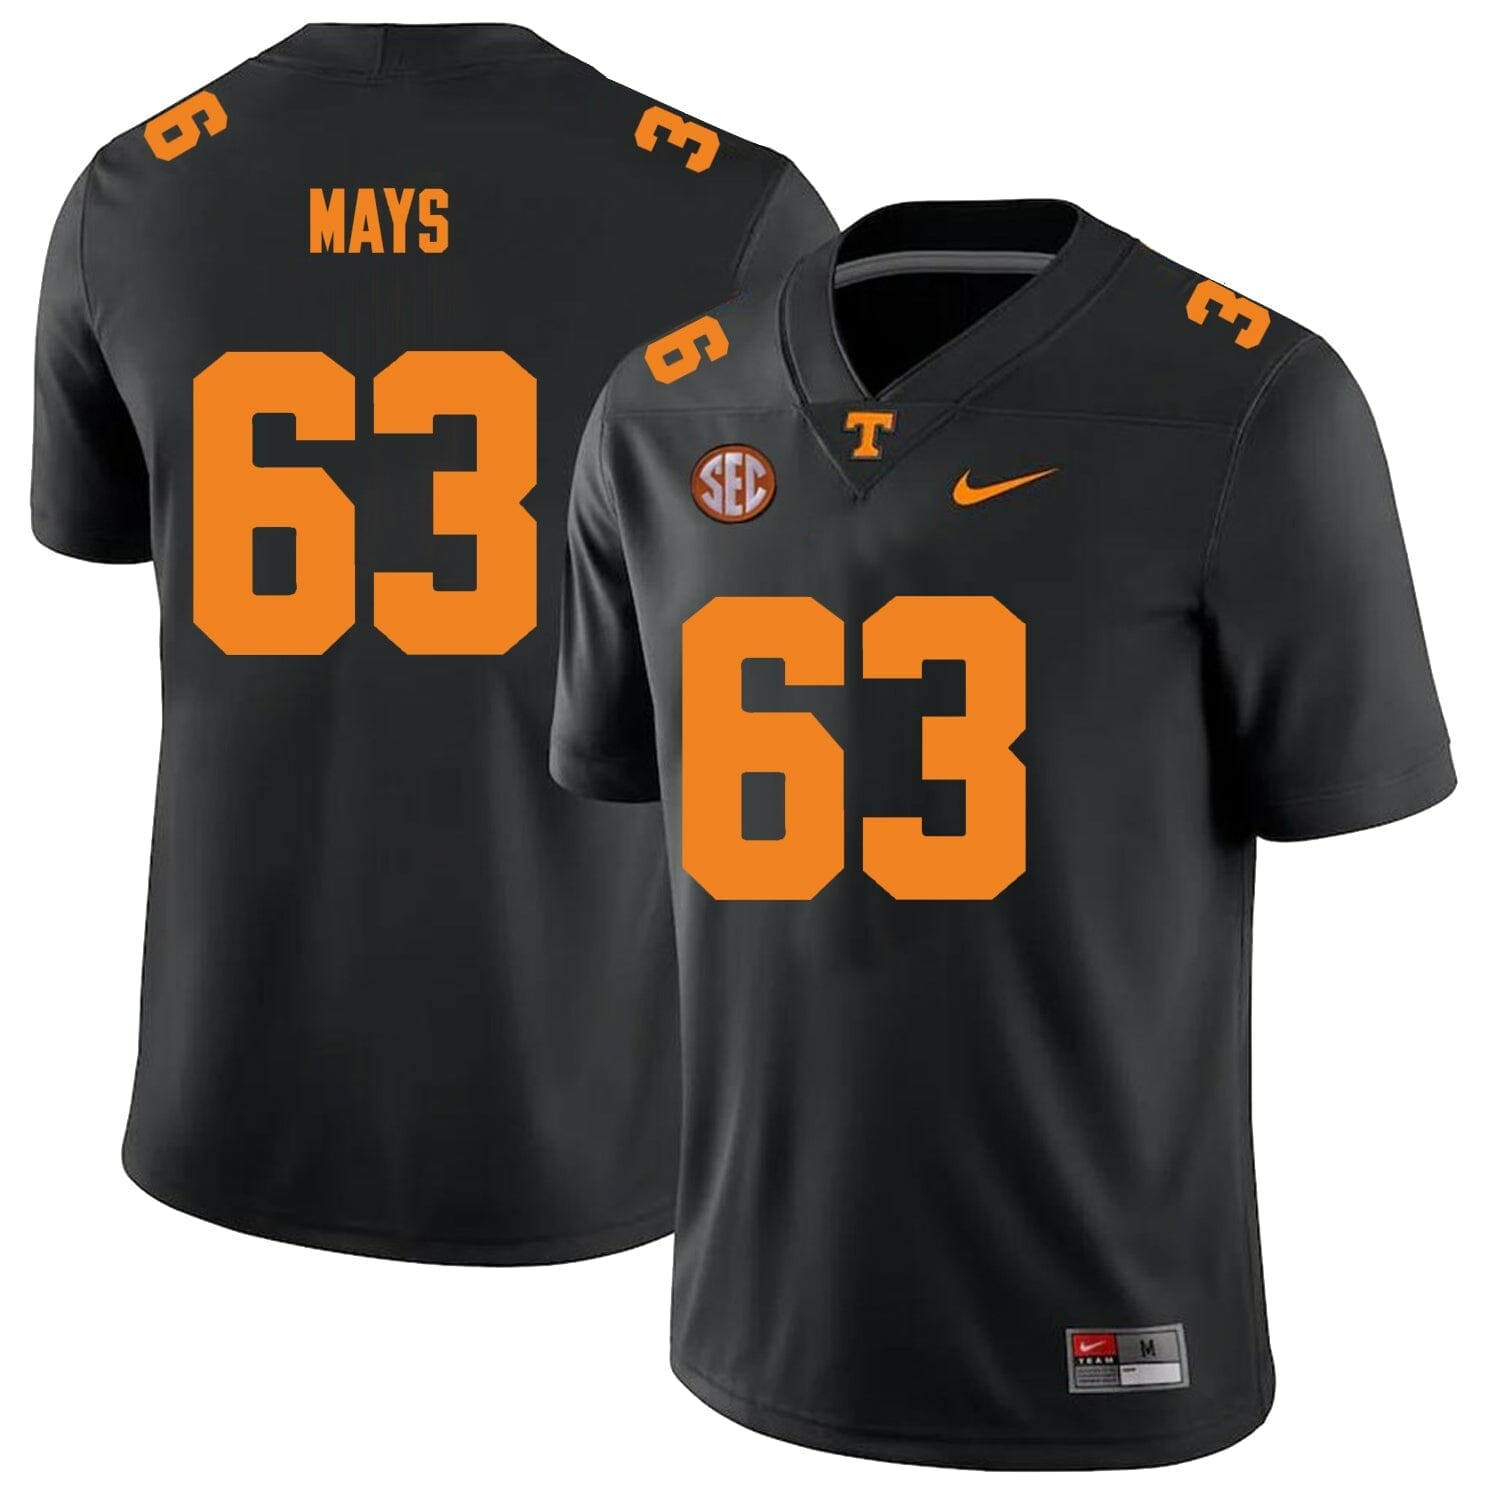 Cooper Mays Jersey Tennessee Volunteers #63 College Football New Black